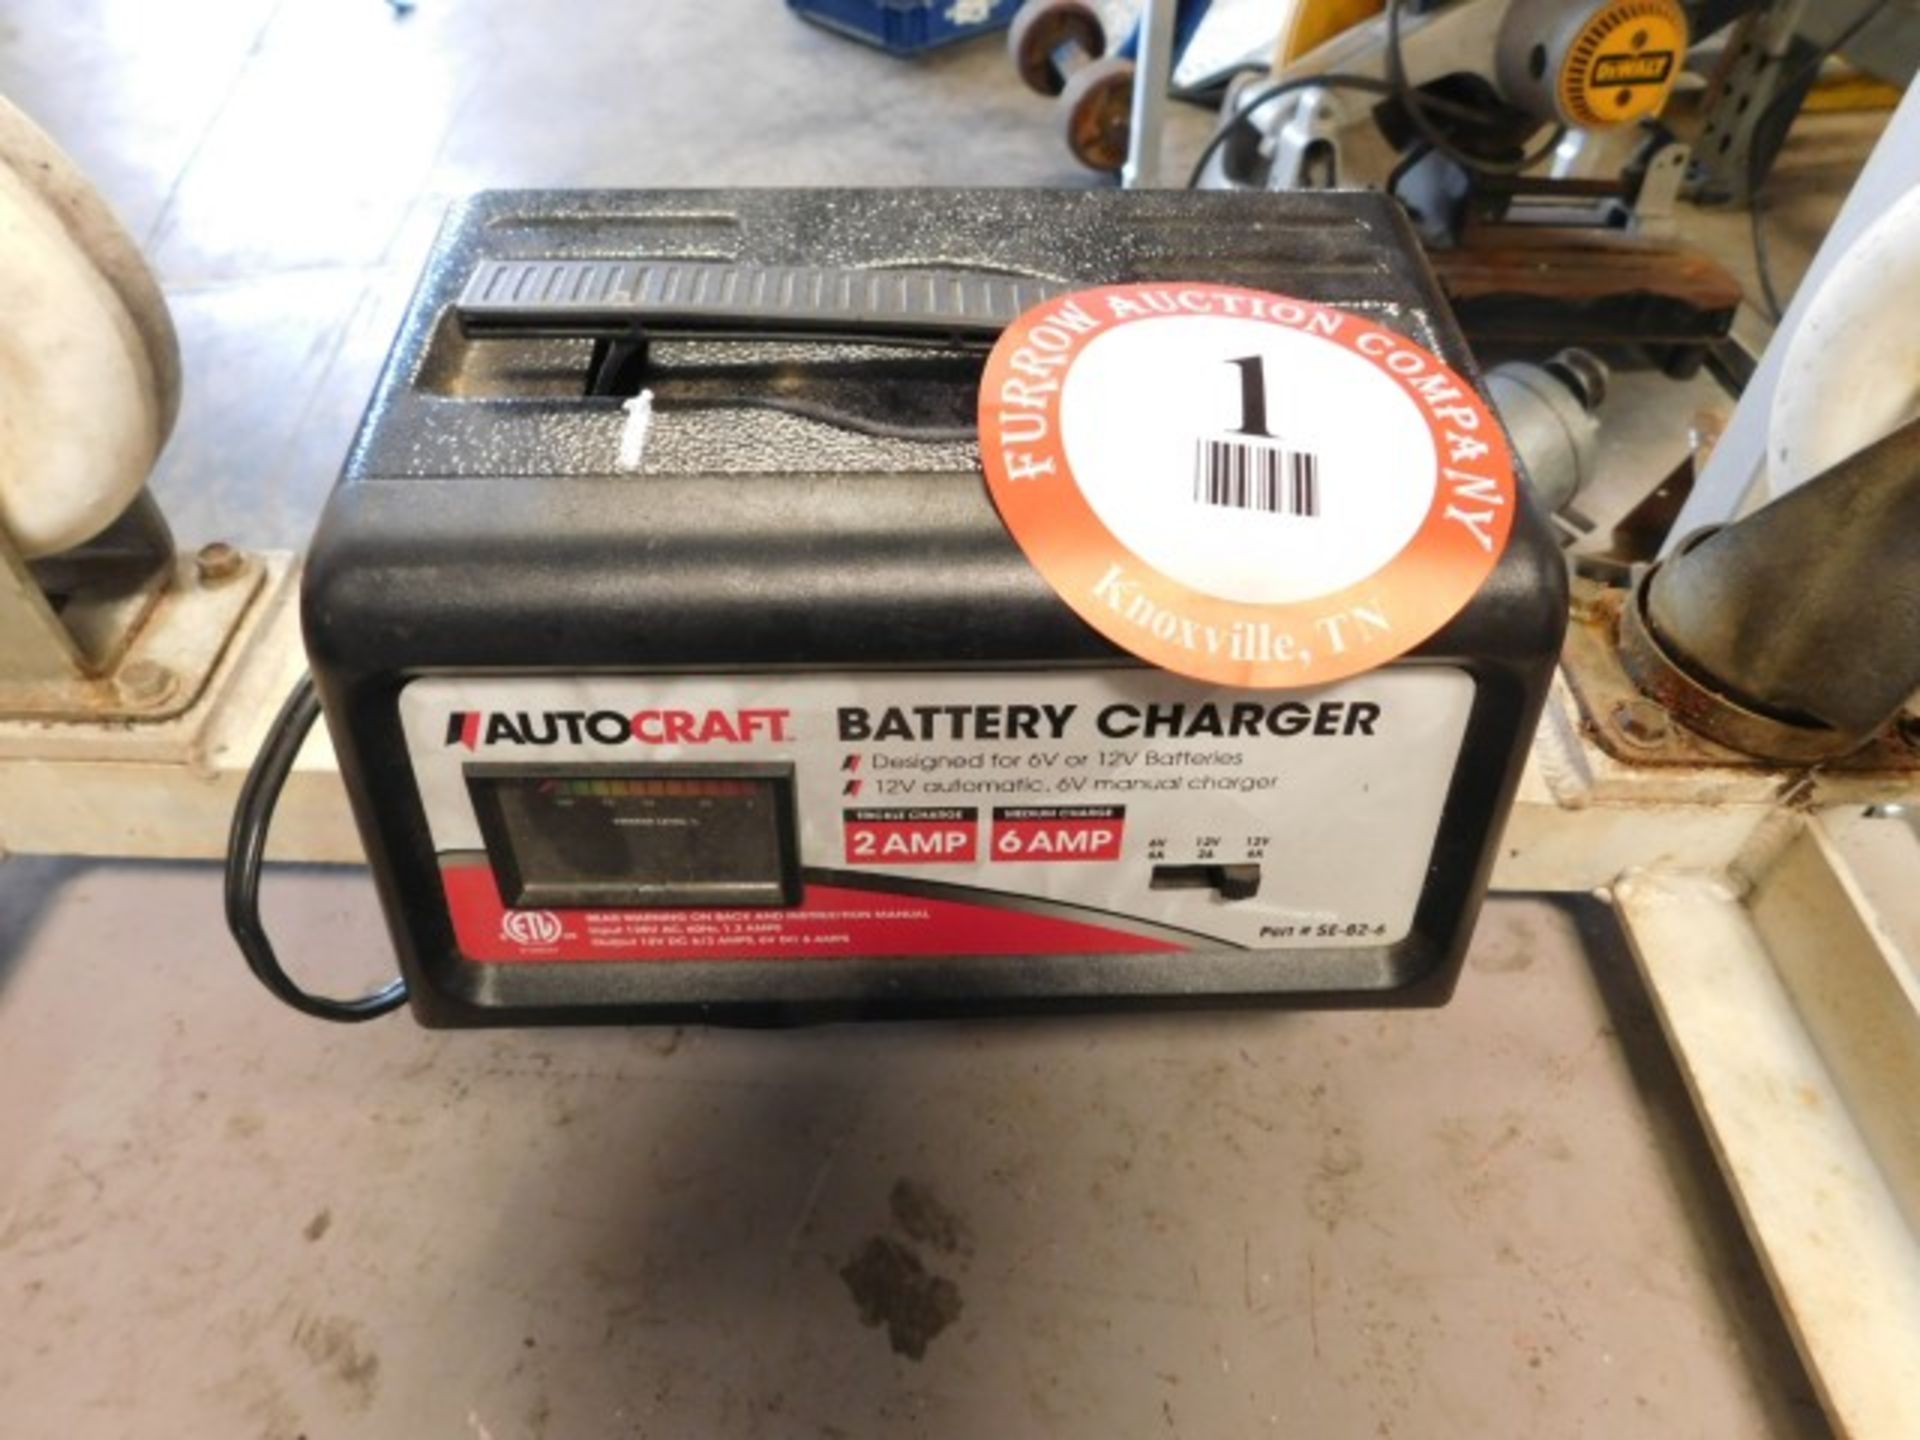 Autocraft Battery Charger, 2amp/6amp